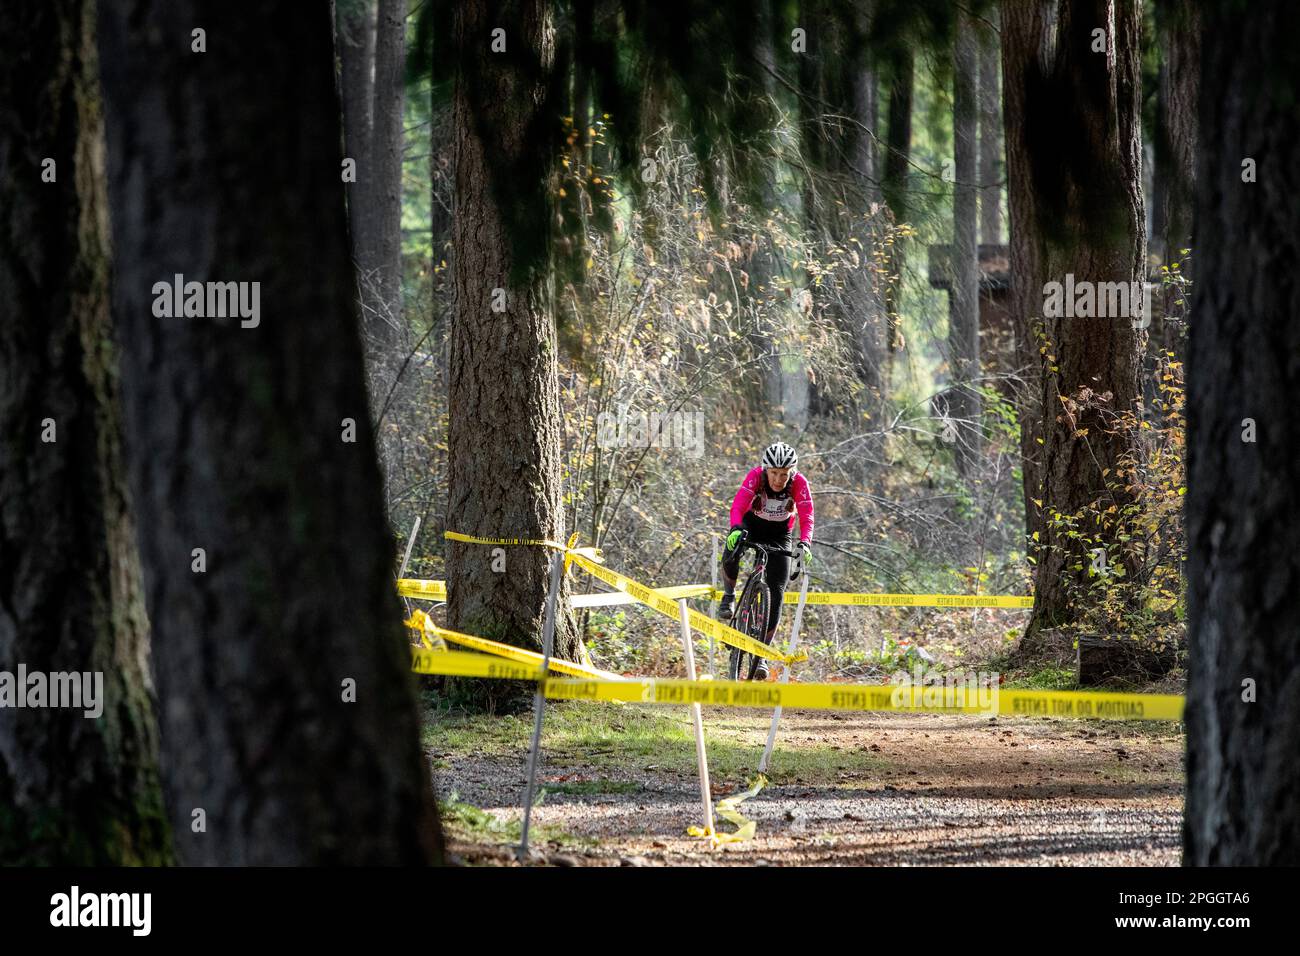 WA24090-00....Washington - Senior citizen Vicky Spring (69) compeating in a cyclocross race in Western Washington. Vicky in pink. Stock Photo